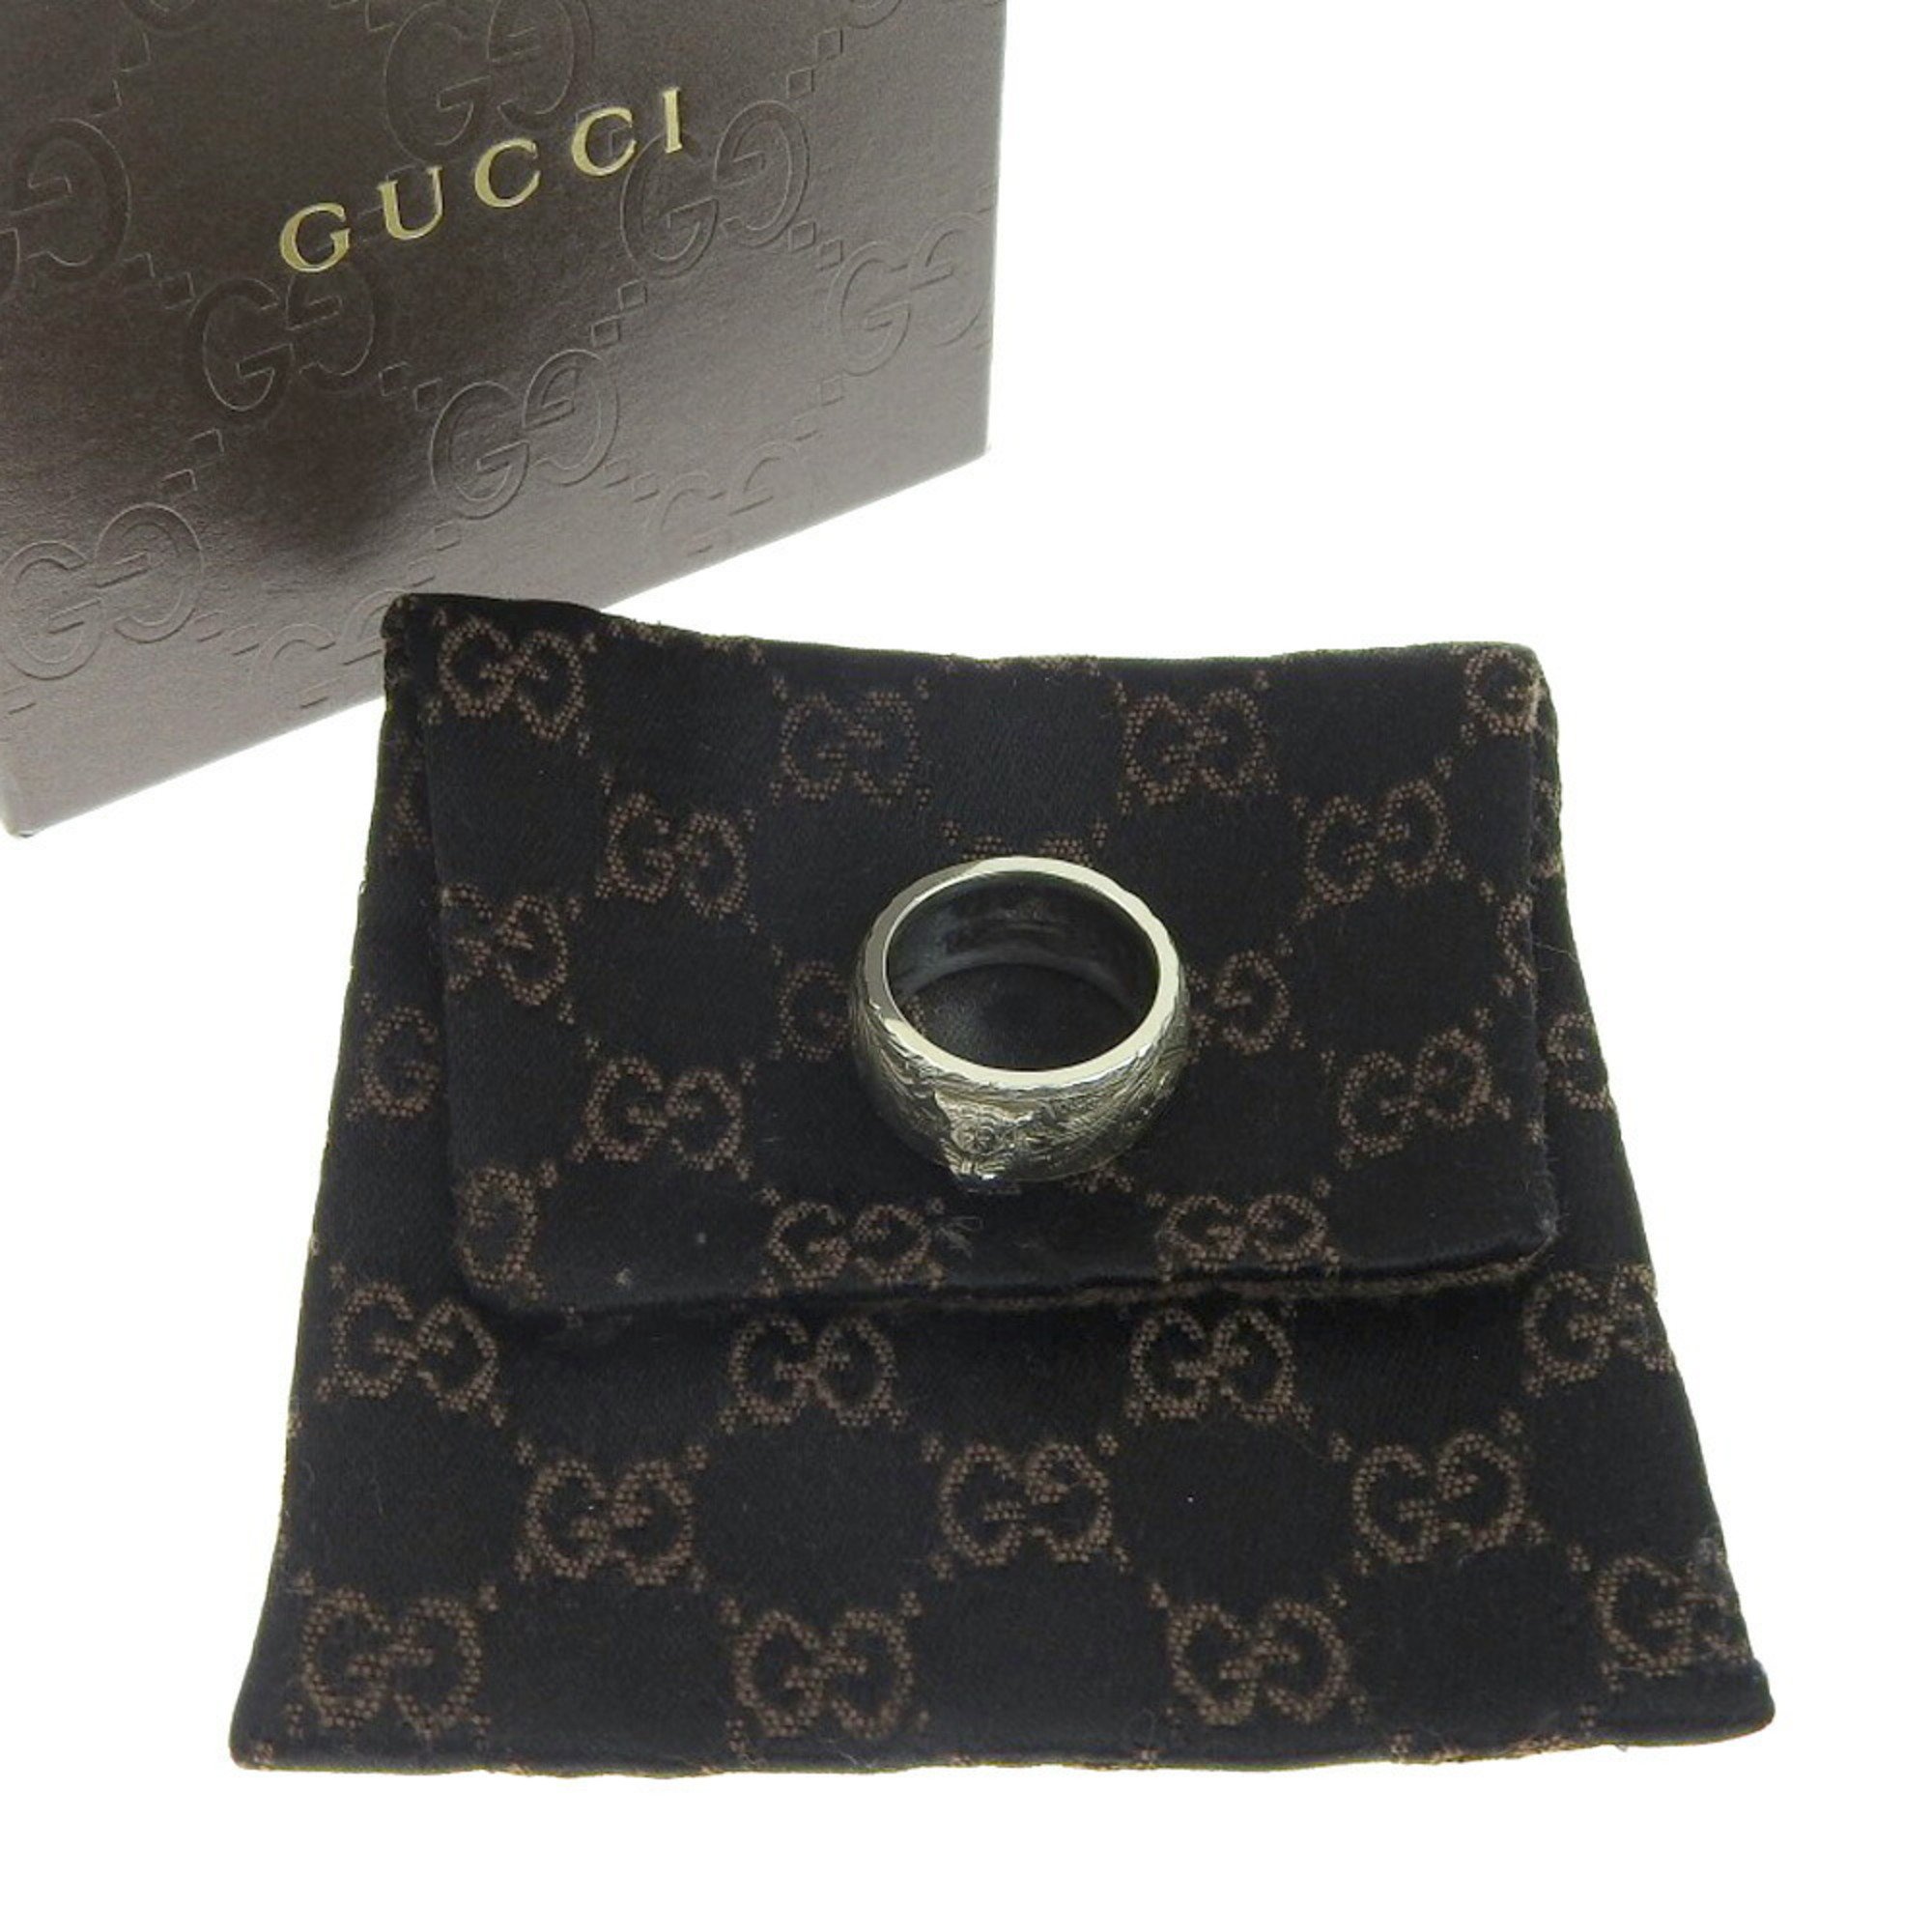 GUCCI Cat Ring SV925 Silver 925 #15 13.5 Tiger